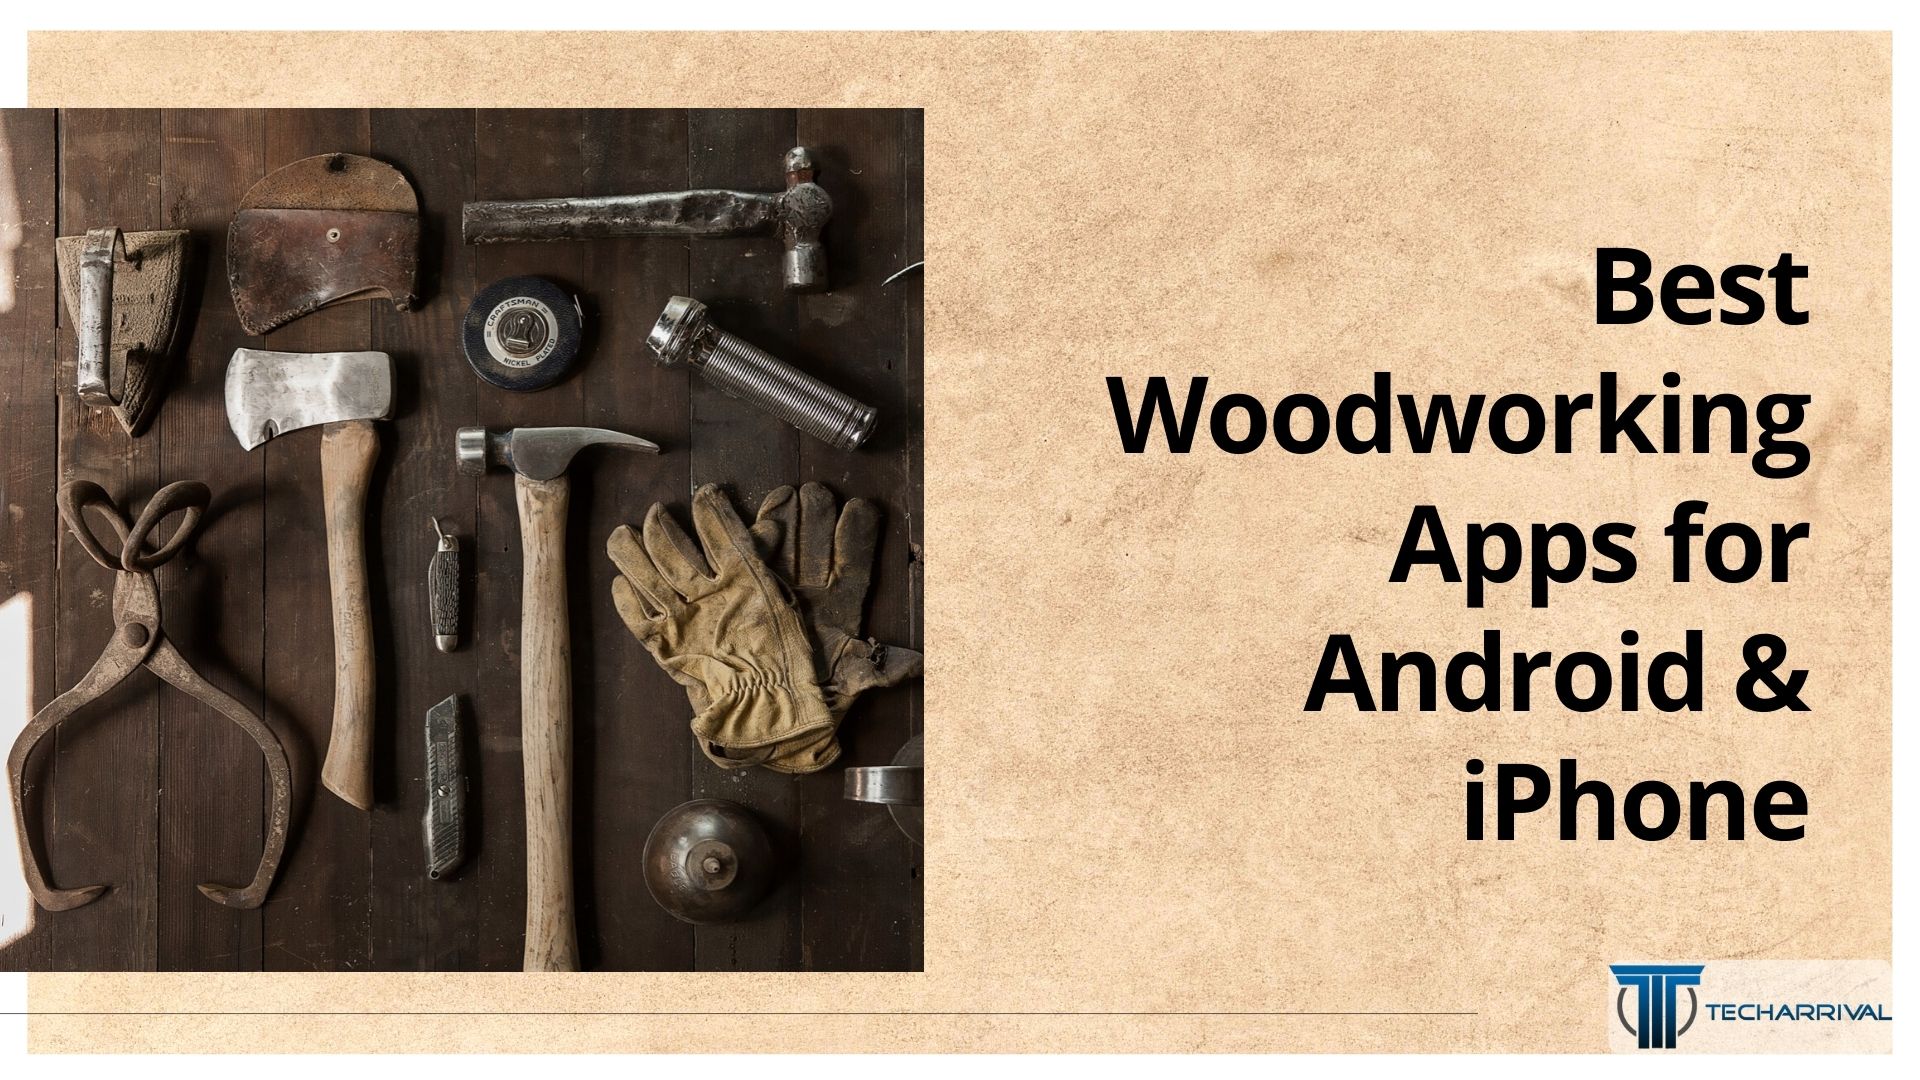 20 Best Woodworking Apps for Android & iPhone (2022)